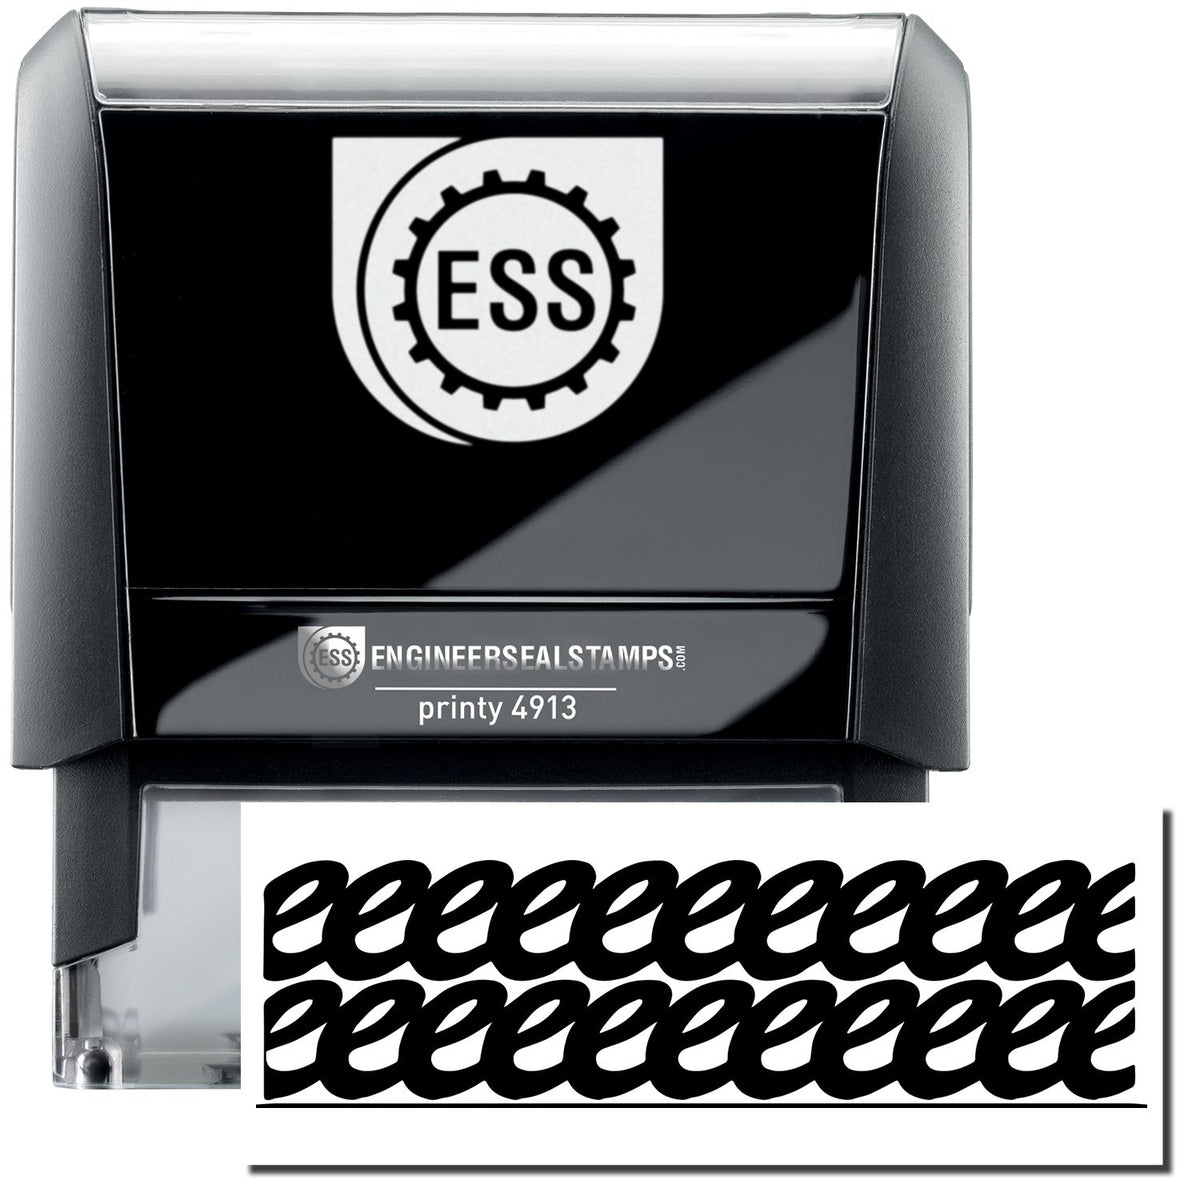 A self-inking stamp with a stamped image showing how the wrongly written texts can be hidden behind the image displayed by this strikeout stamp after stamping. It helps to cover up data or information that shouldn&#39;t be on a file or folder.